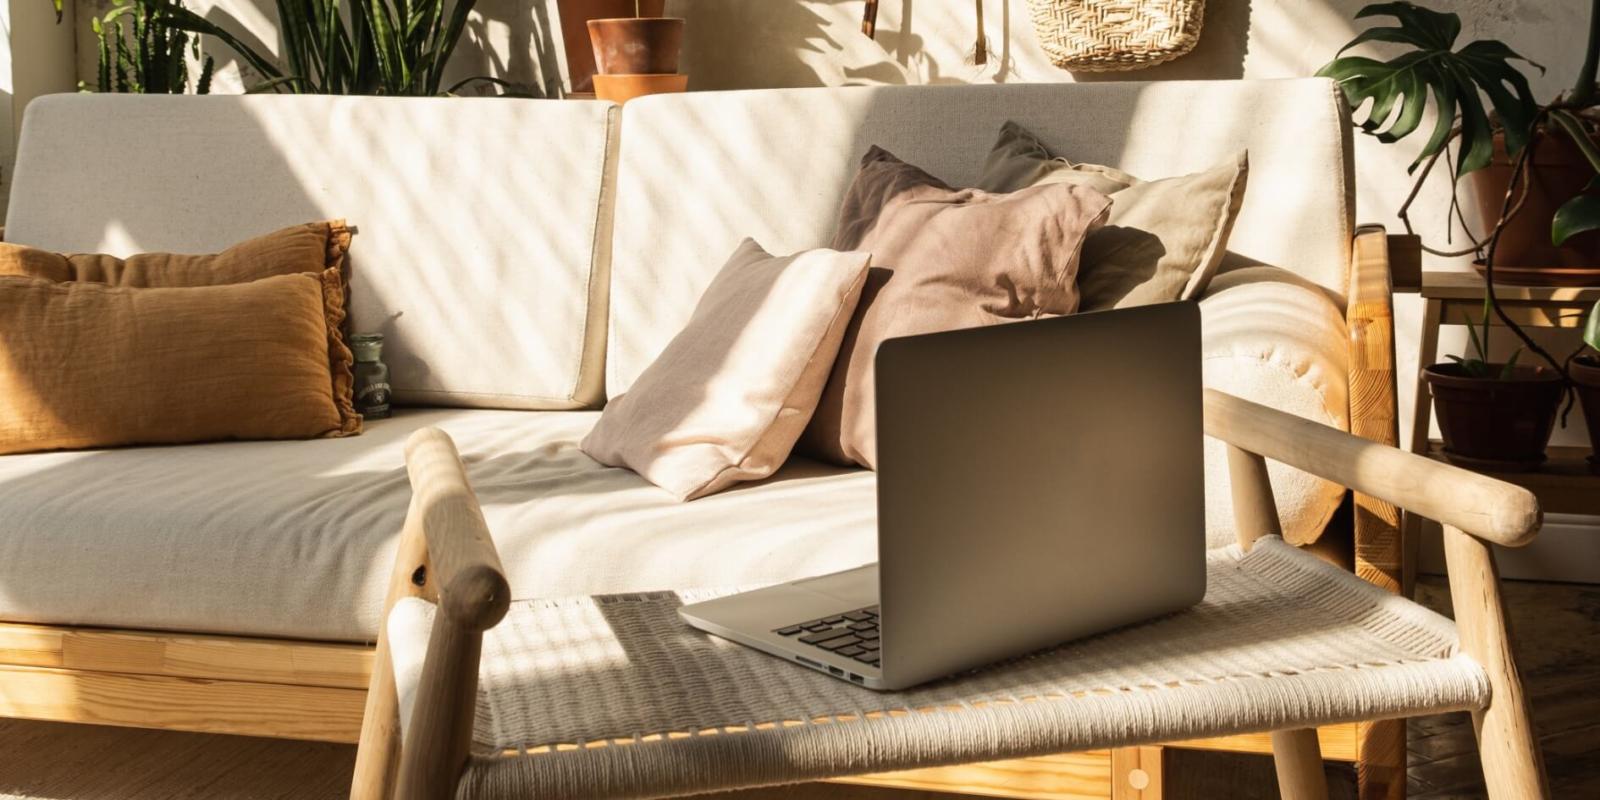 8 Best Work From Home Blogs for Remote Workers